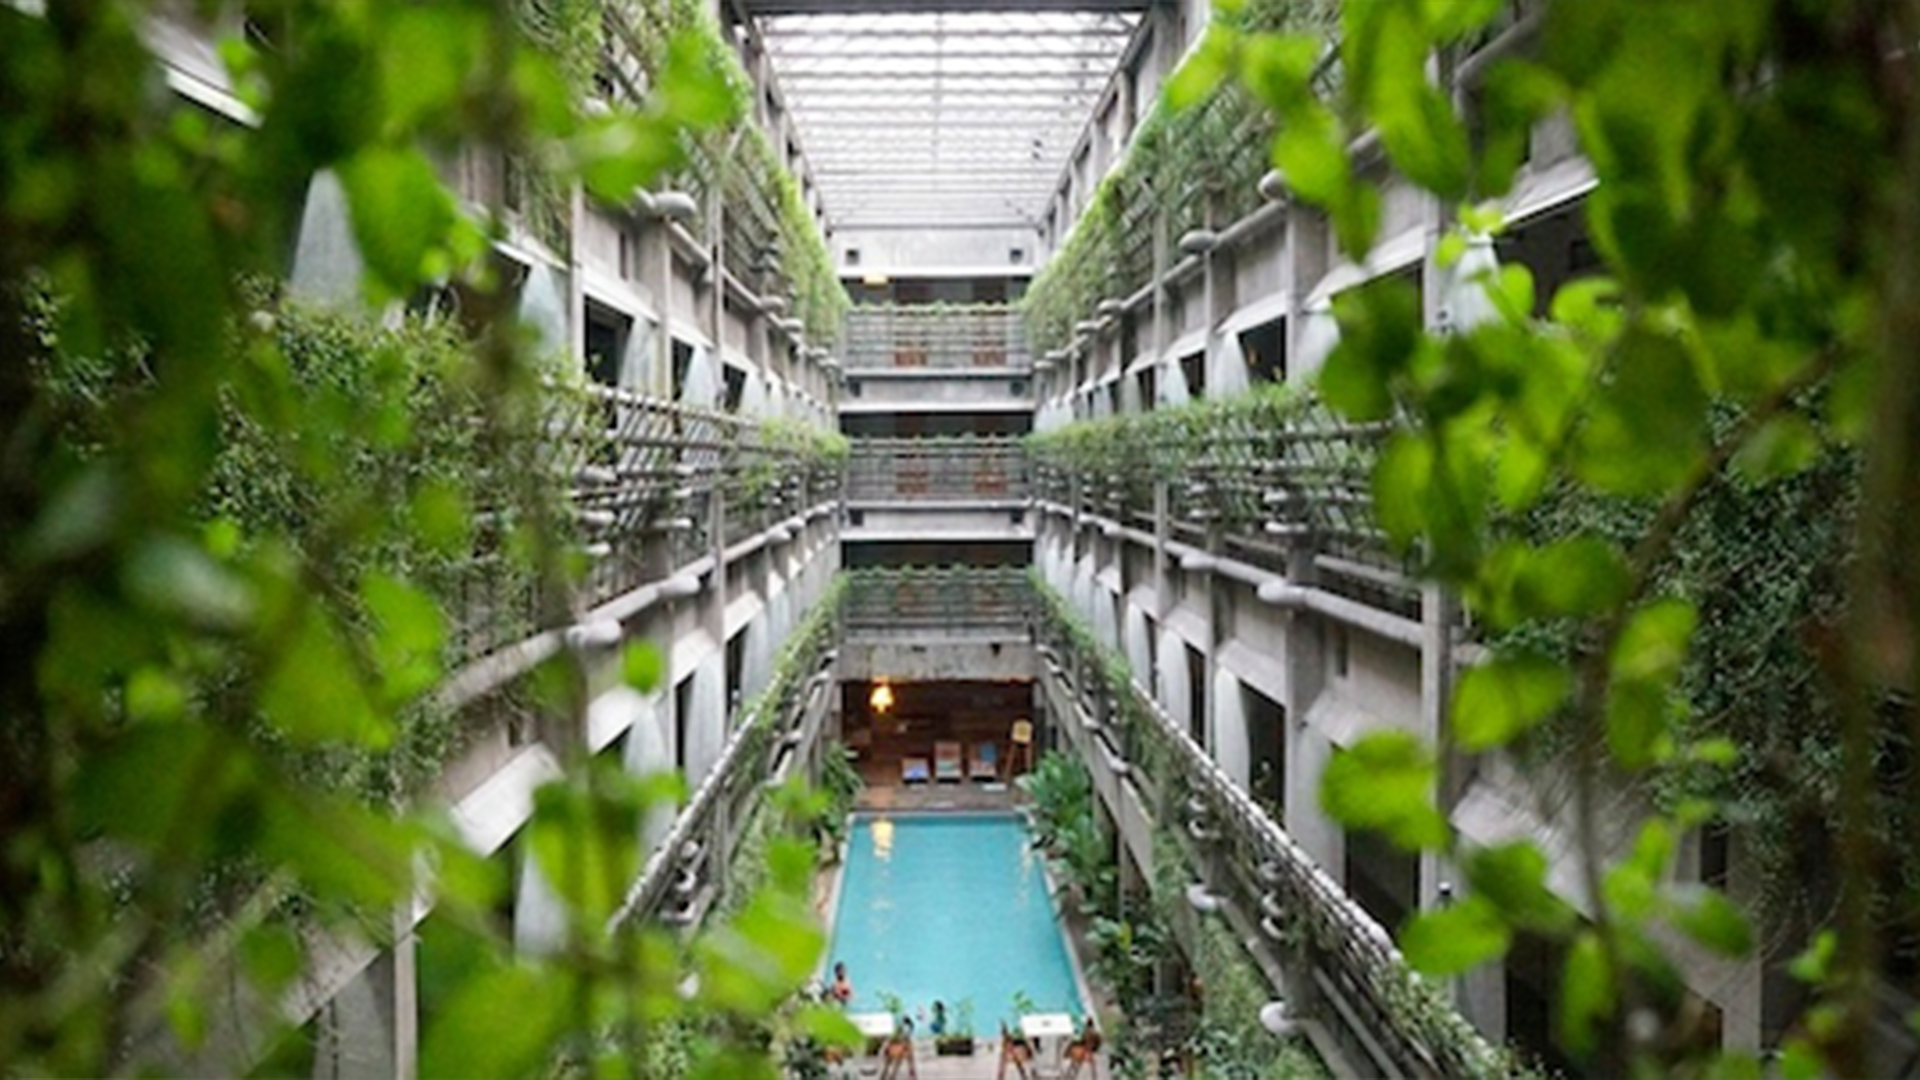 The problem with sustainability | Interior shared space with a pool